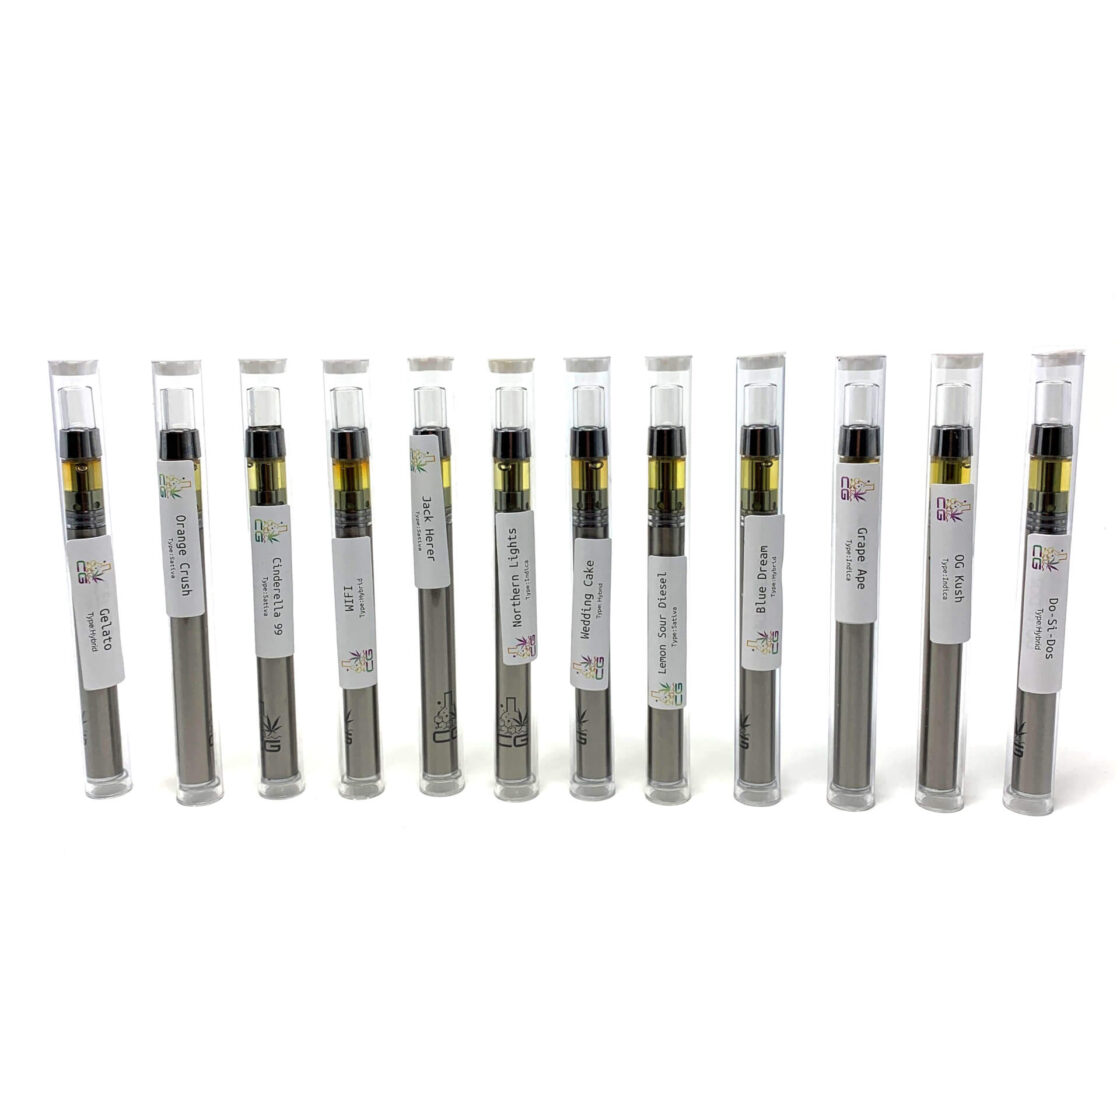 Cg Extracts – Disposable Cannabis Oil Vape Pens (0.5ml)